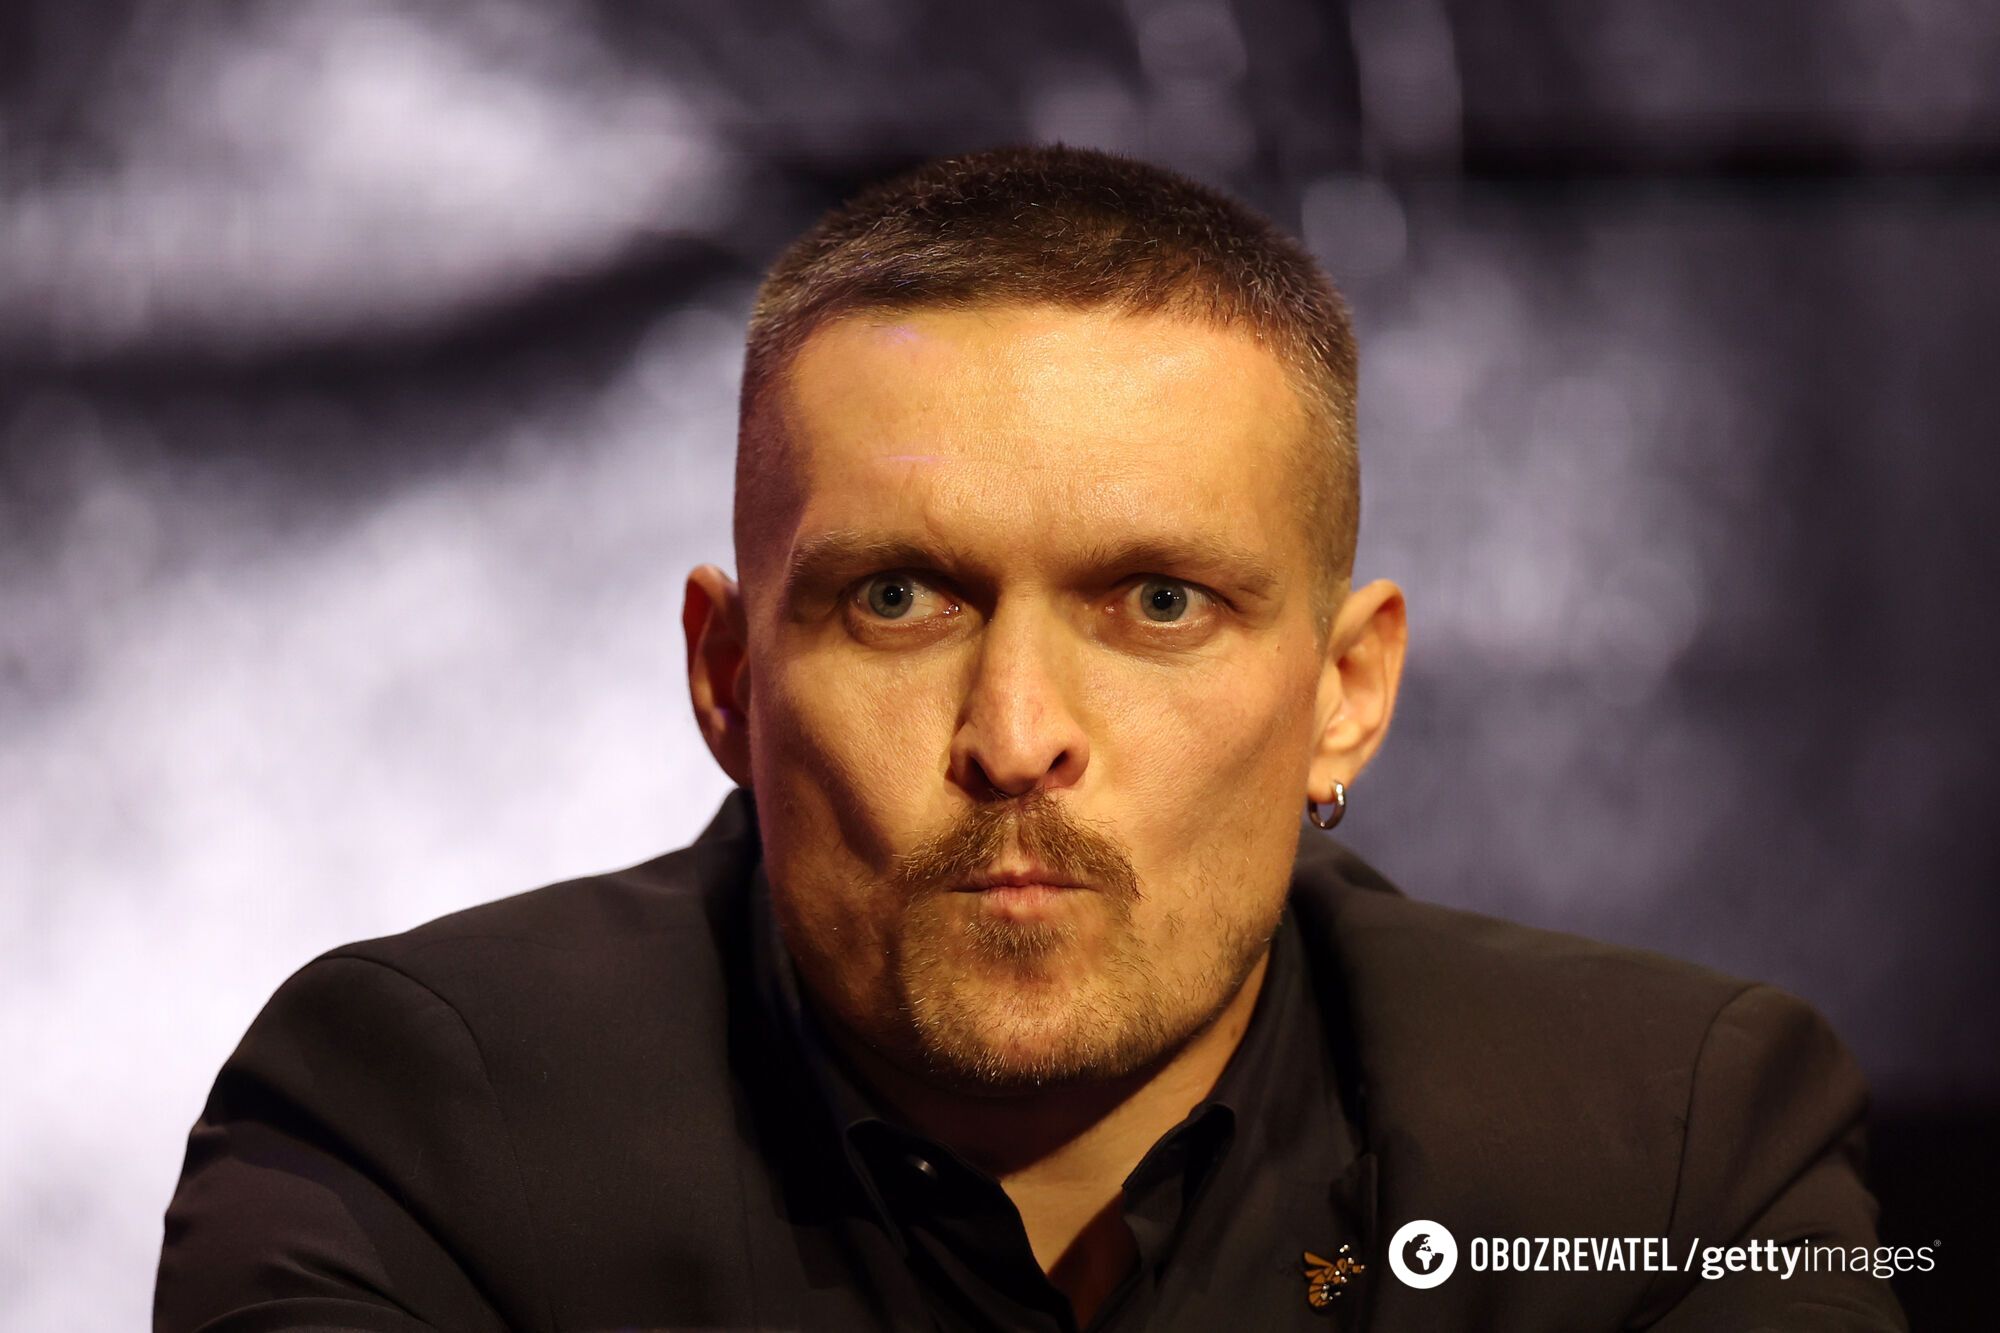 ''Will make it even brighter'': famous Ukrainian boxer tells what will happen in the Usyk-Fury fight